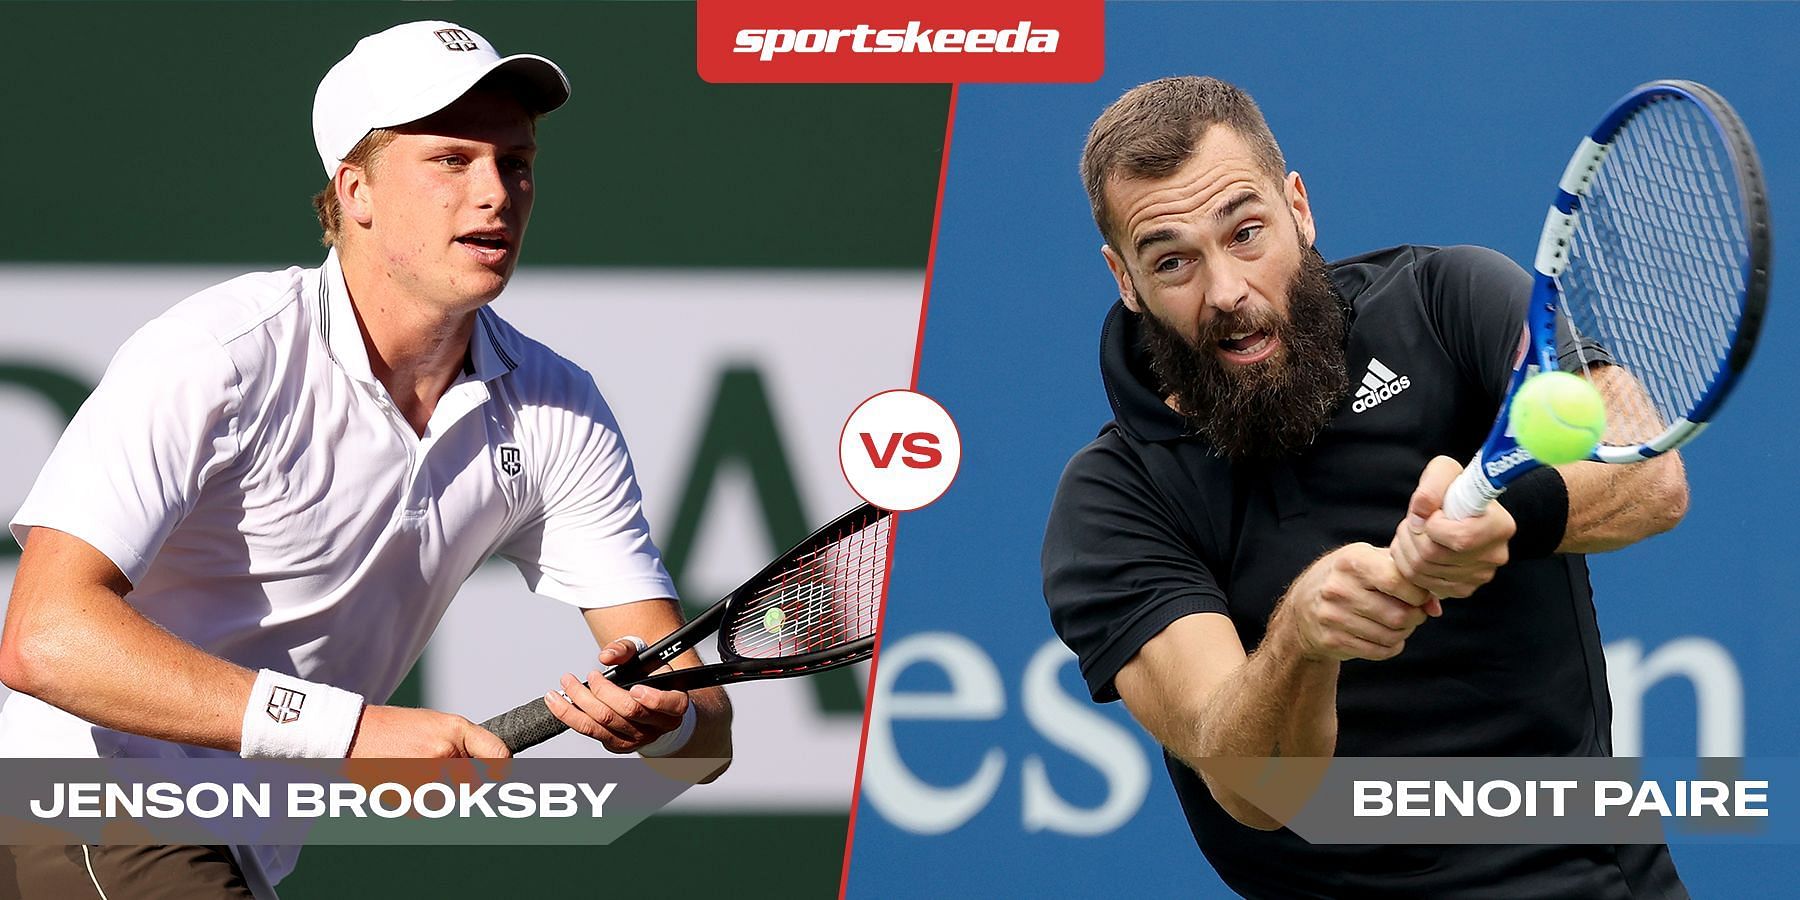 Atlanta Open 2022 Jenson Brooksby vs Benoit Paire preview, head-to-head, prediction, odds and pick